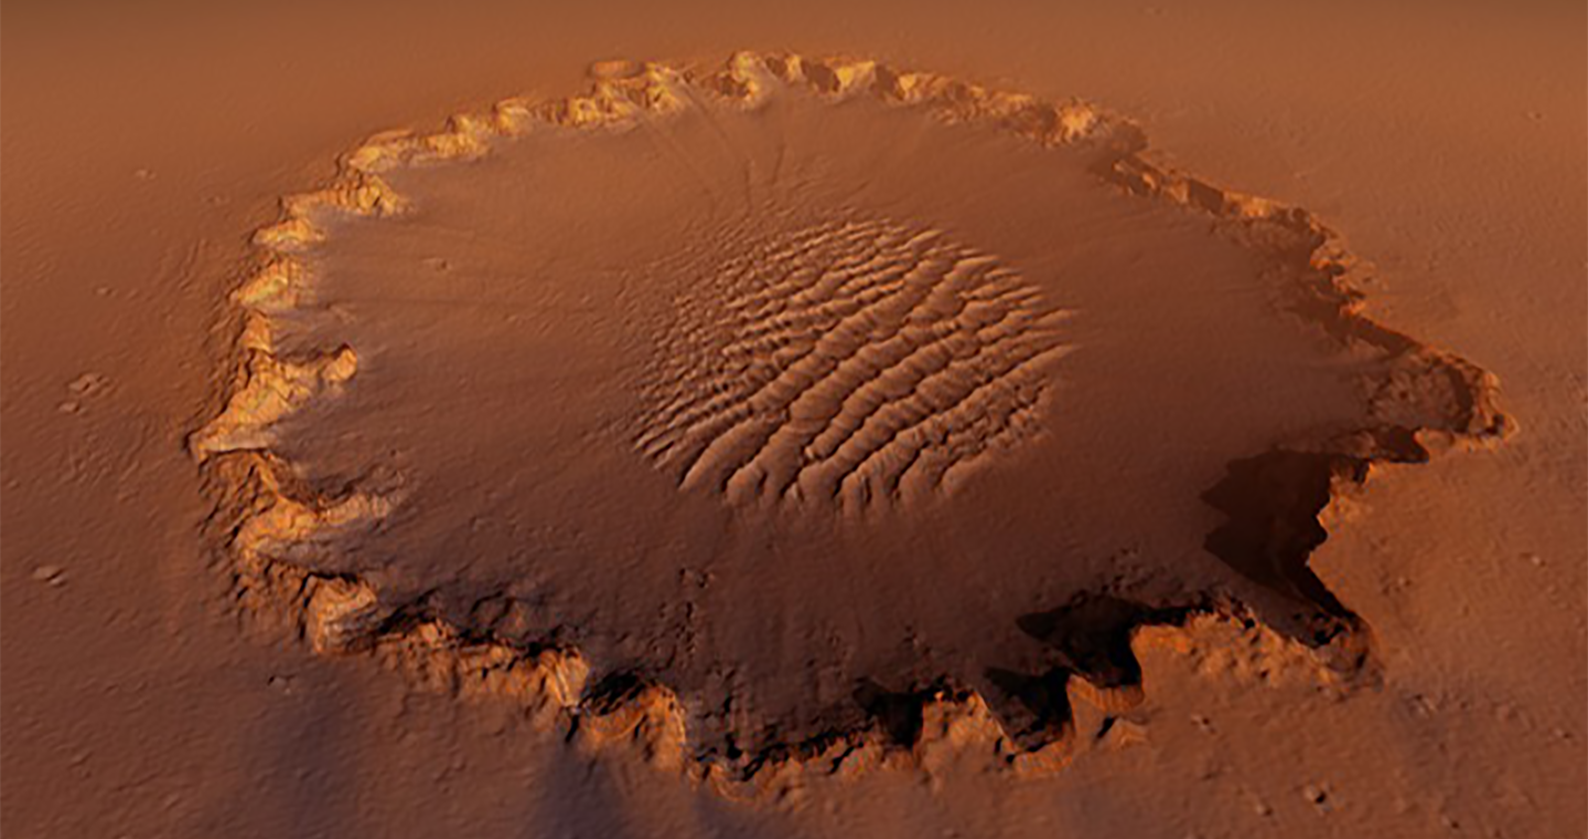 Image for Consistent asteroid showers rock previous thinking on Mars craters